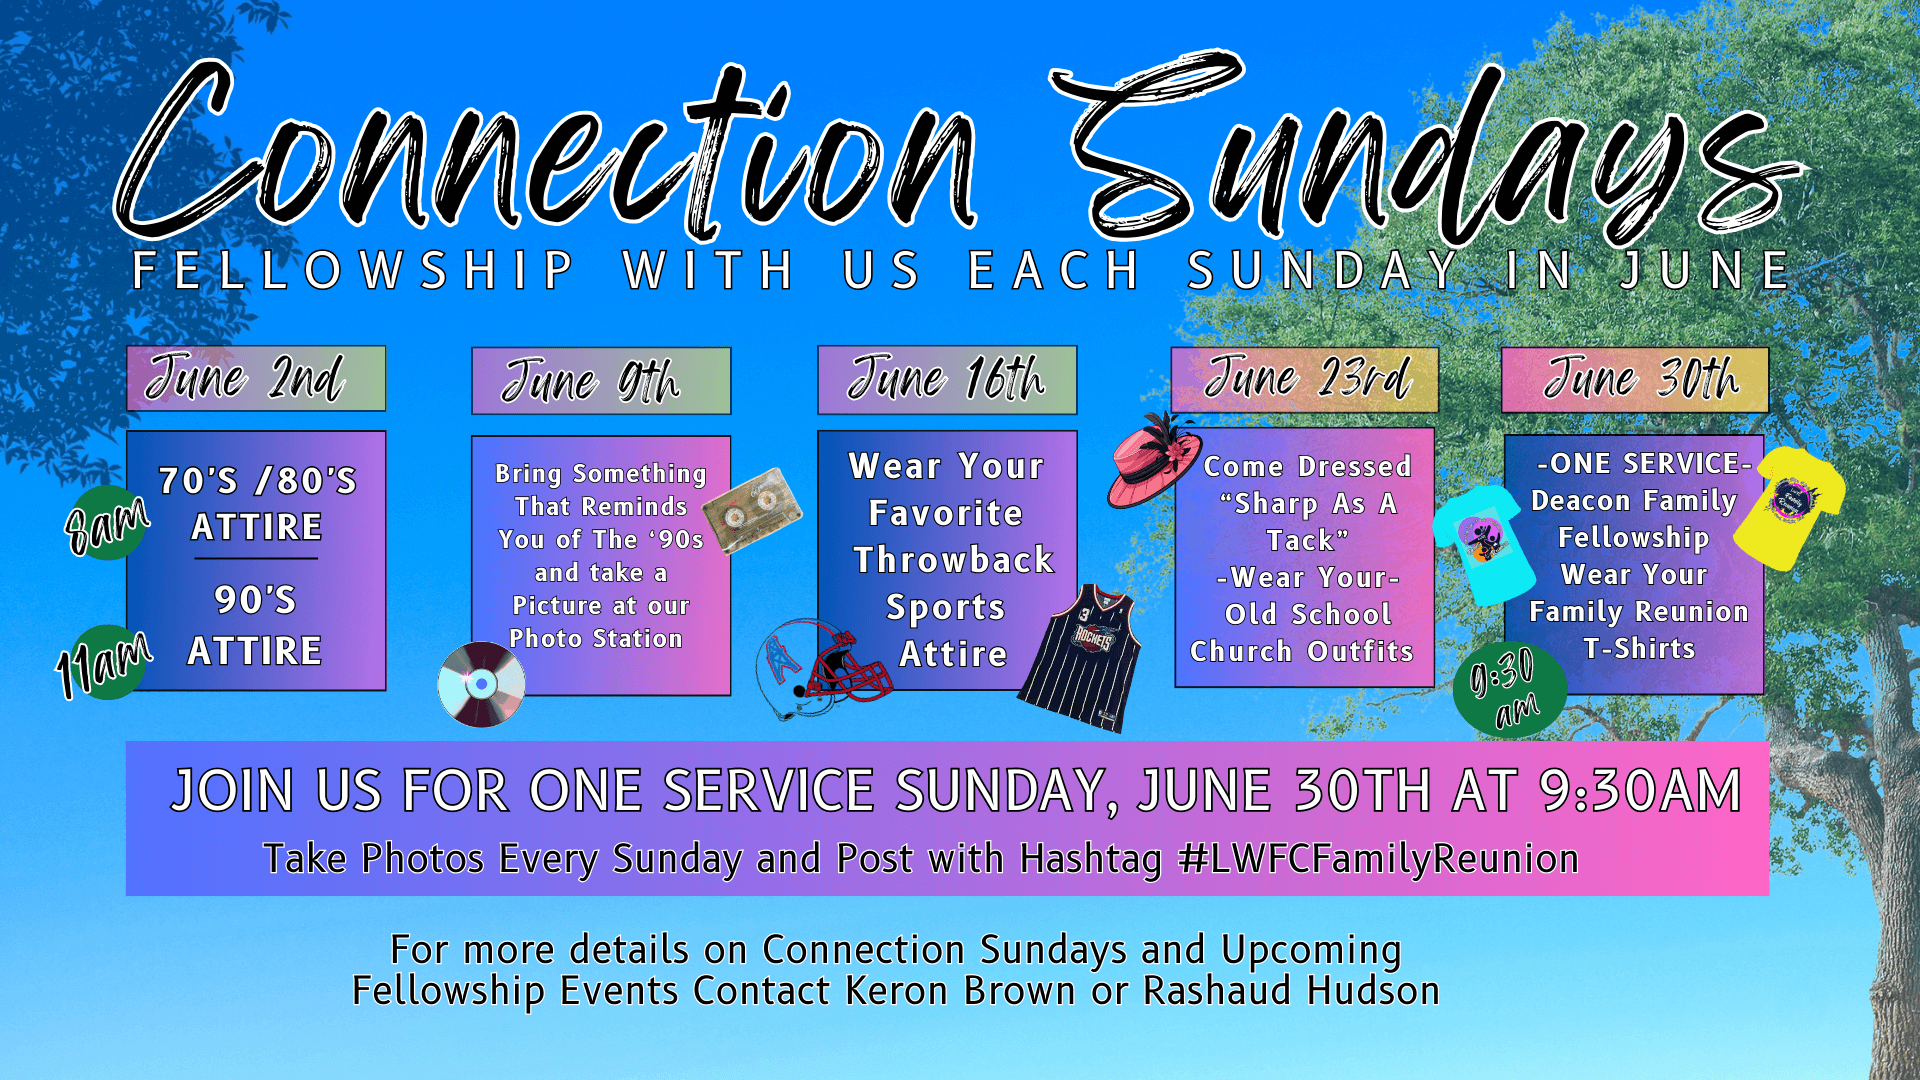 connection sundays: june 2nd 70s - 90s attire, 9th bring 90s memorabilia, 16th wear your favorite throwback sports attire, 23rd wear old school church outfits, 30th deacon family fellowship wear family reunion shirt. take photos with #LWFCFamilyReunion